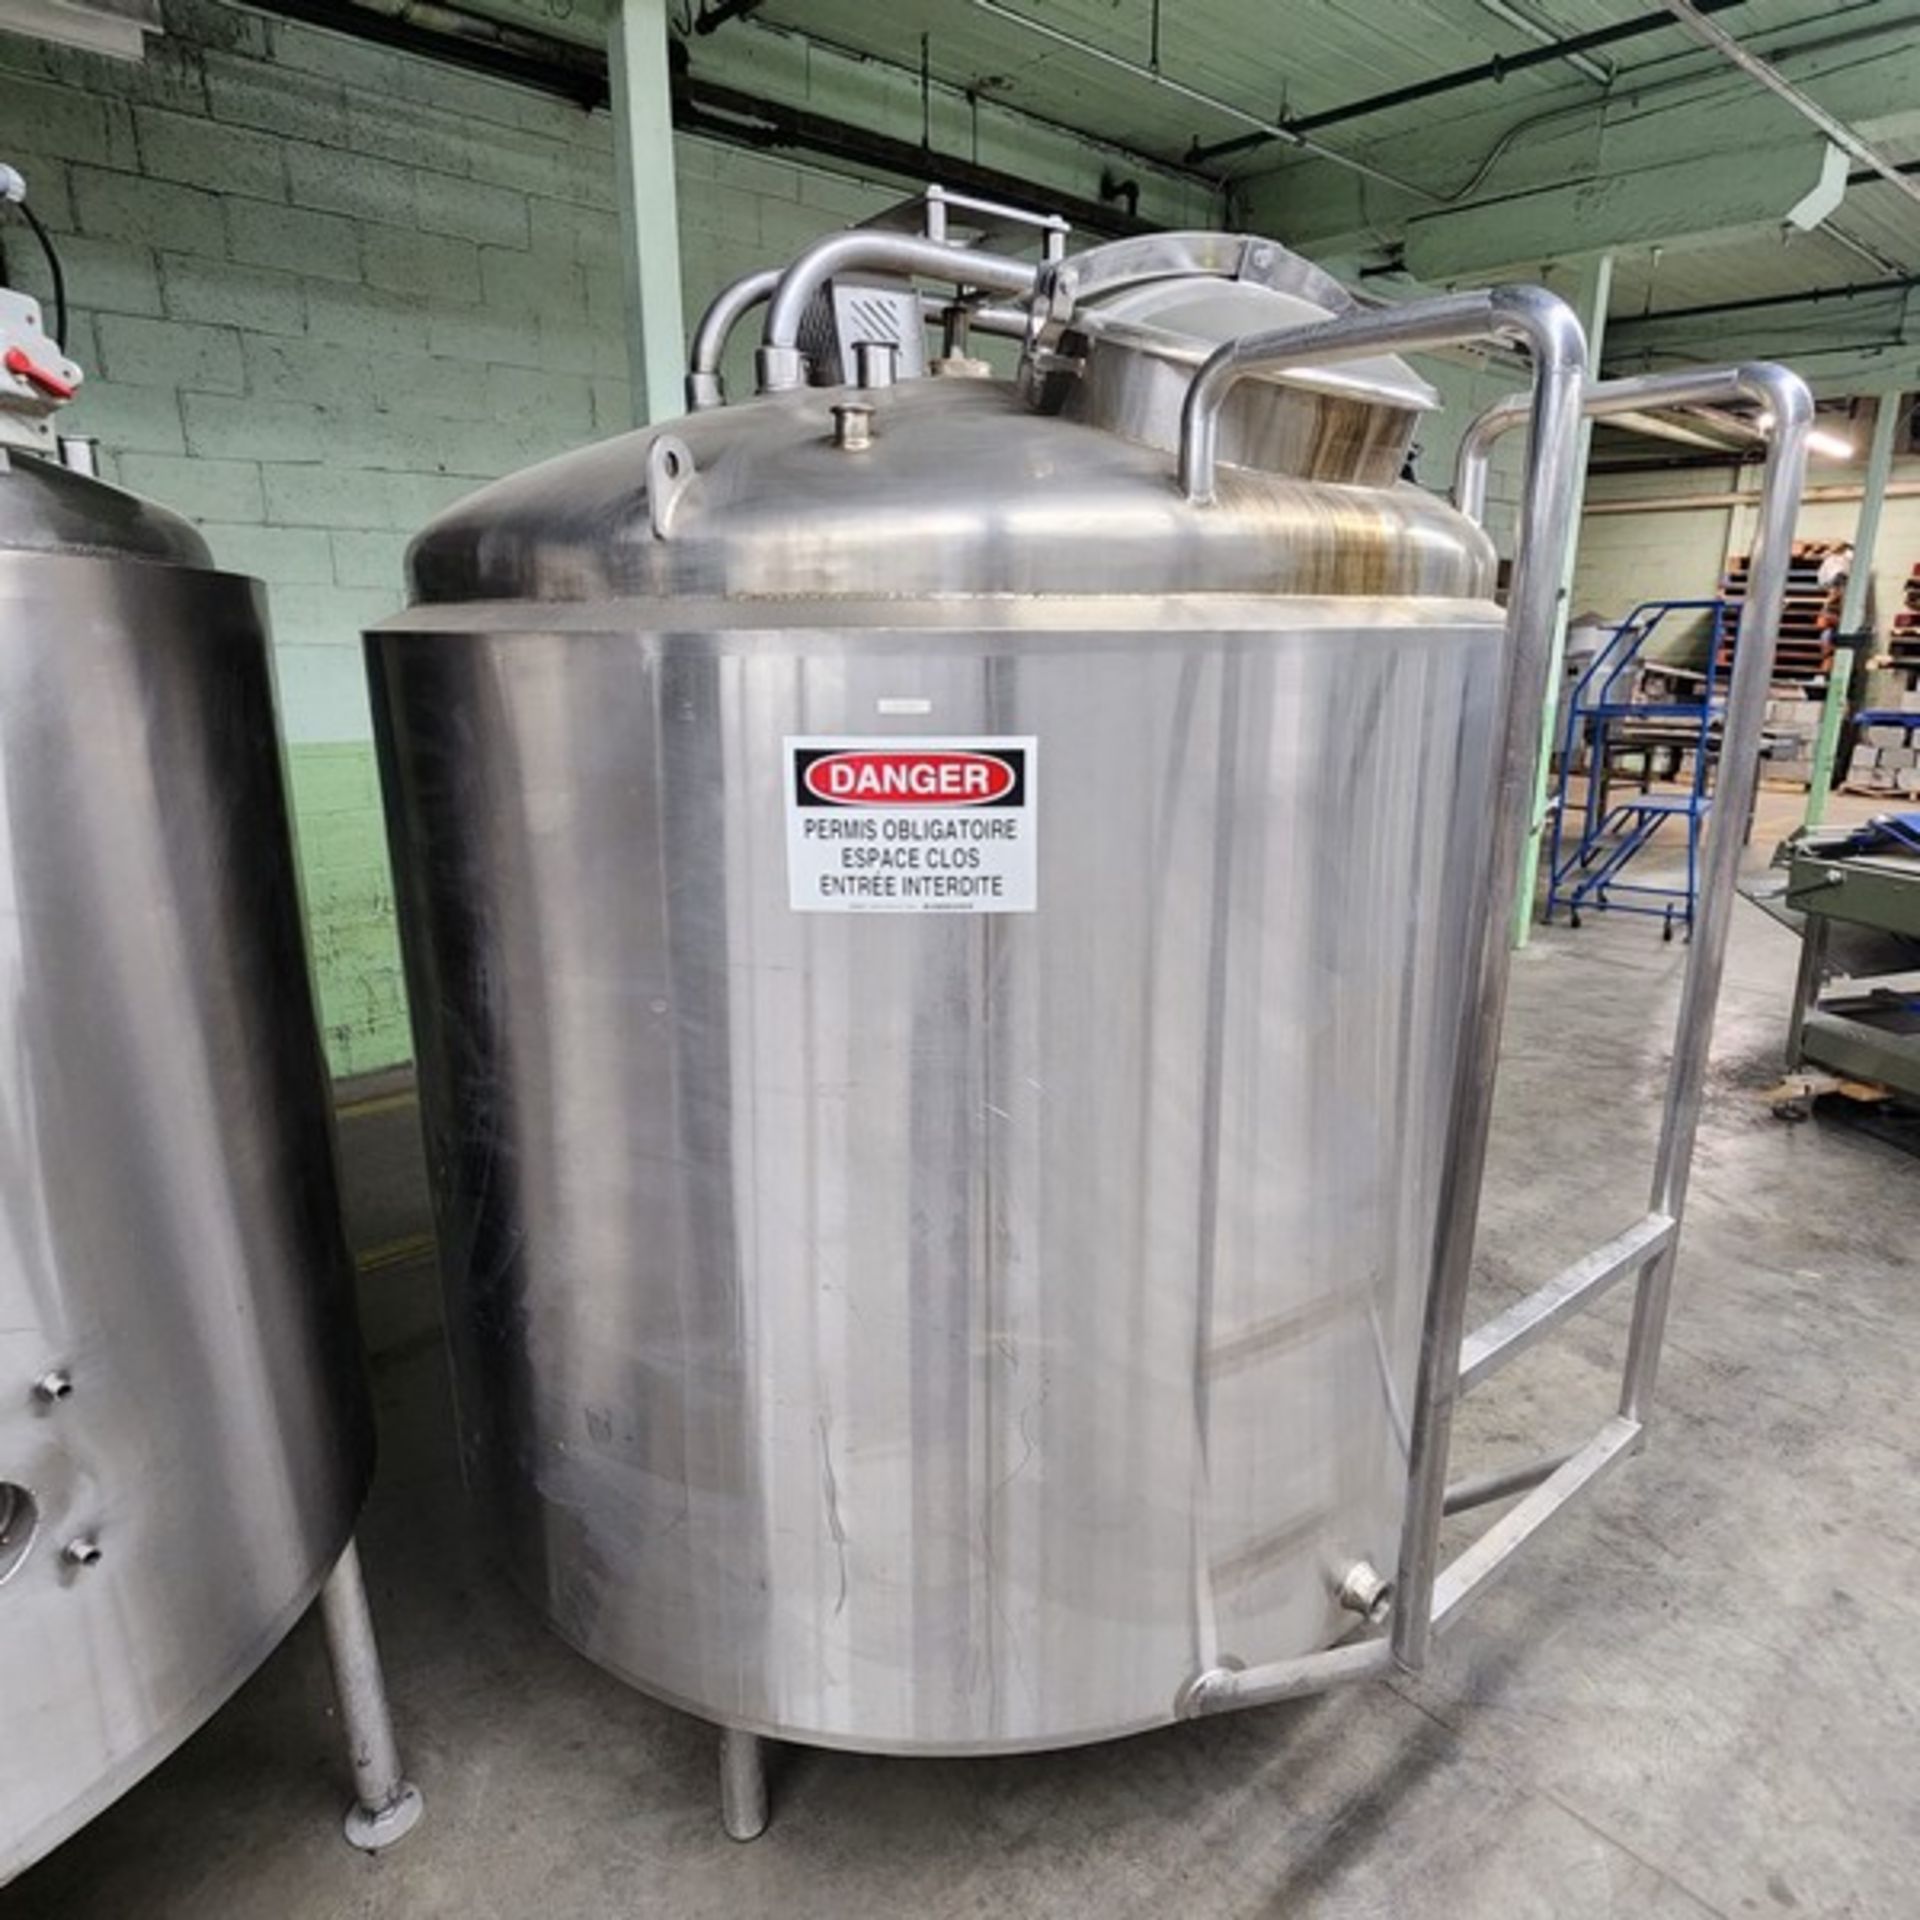 Cooling mixing tank 316 Stainless steel capacity of 750 usg motor\gearbox is missing (Item #102U) (